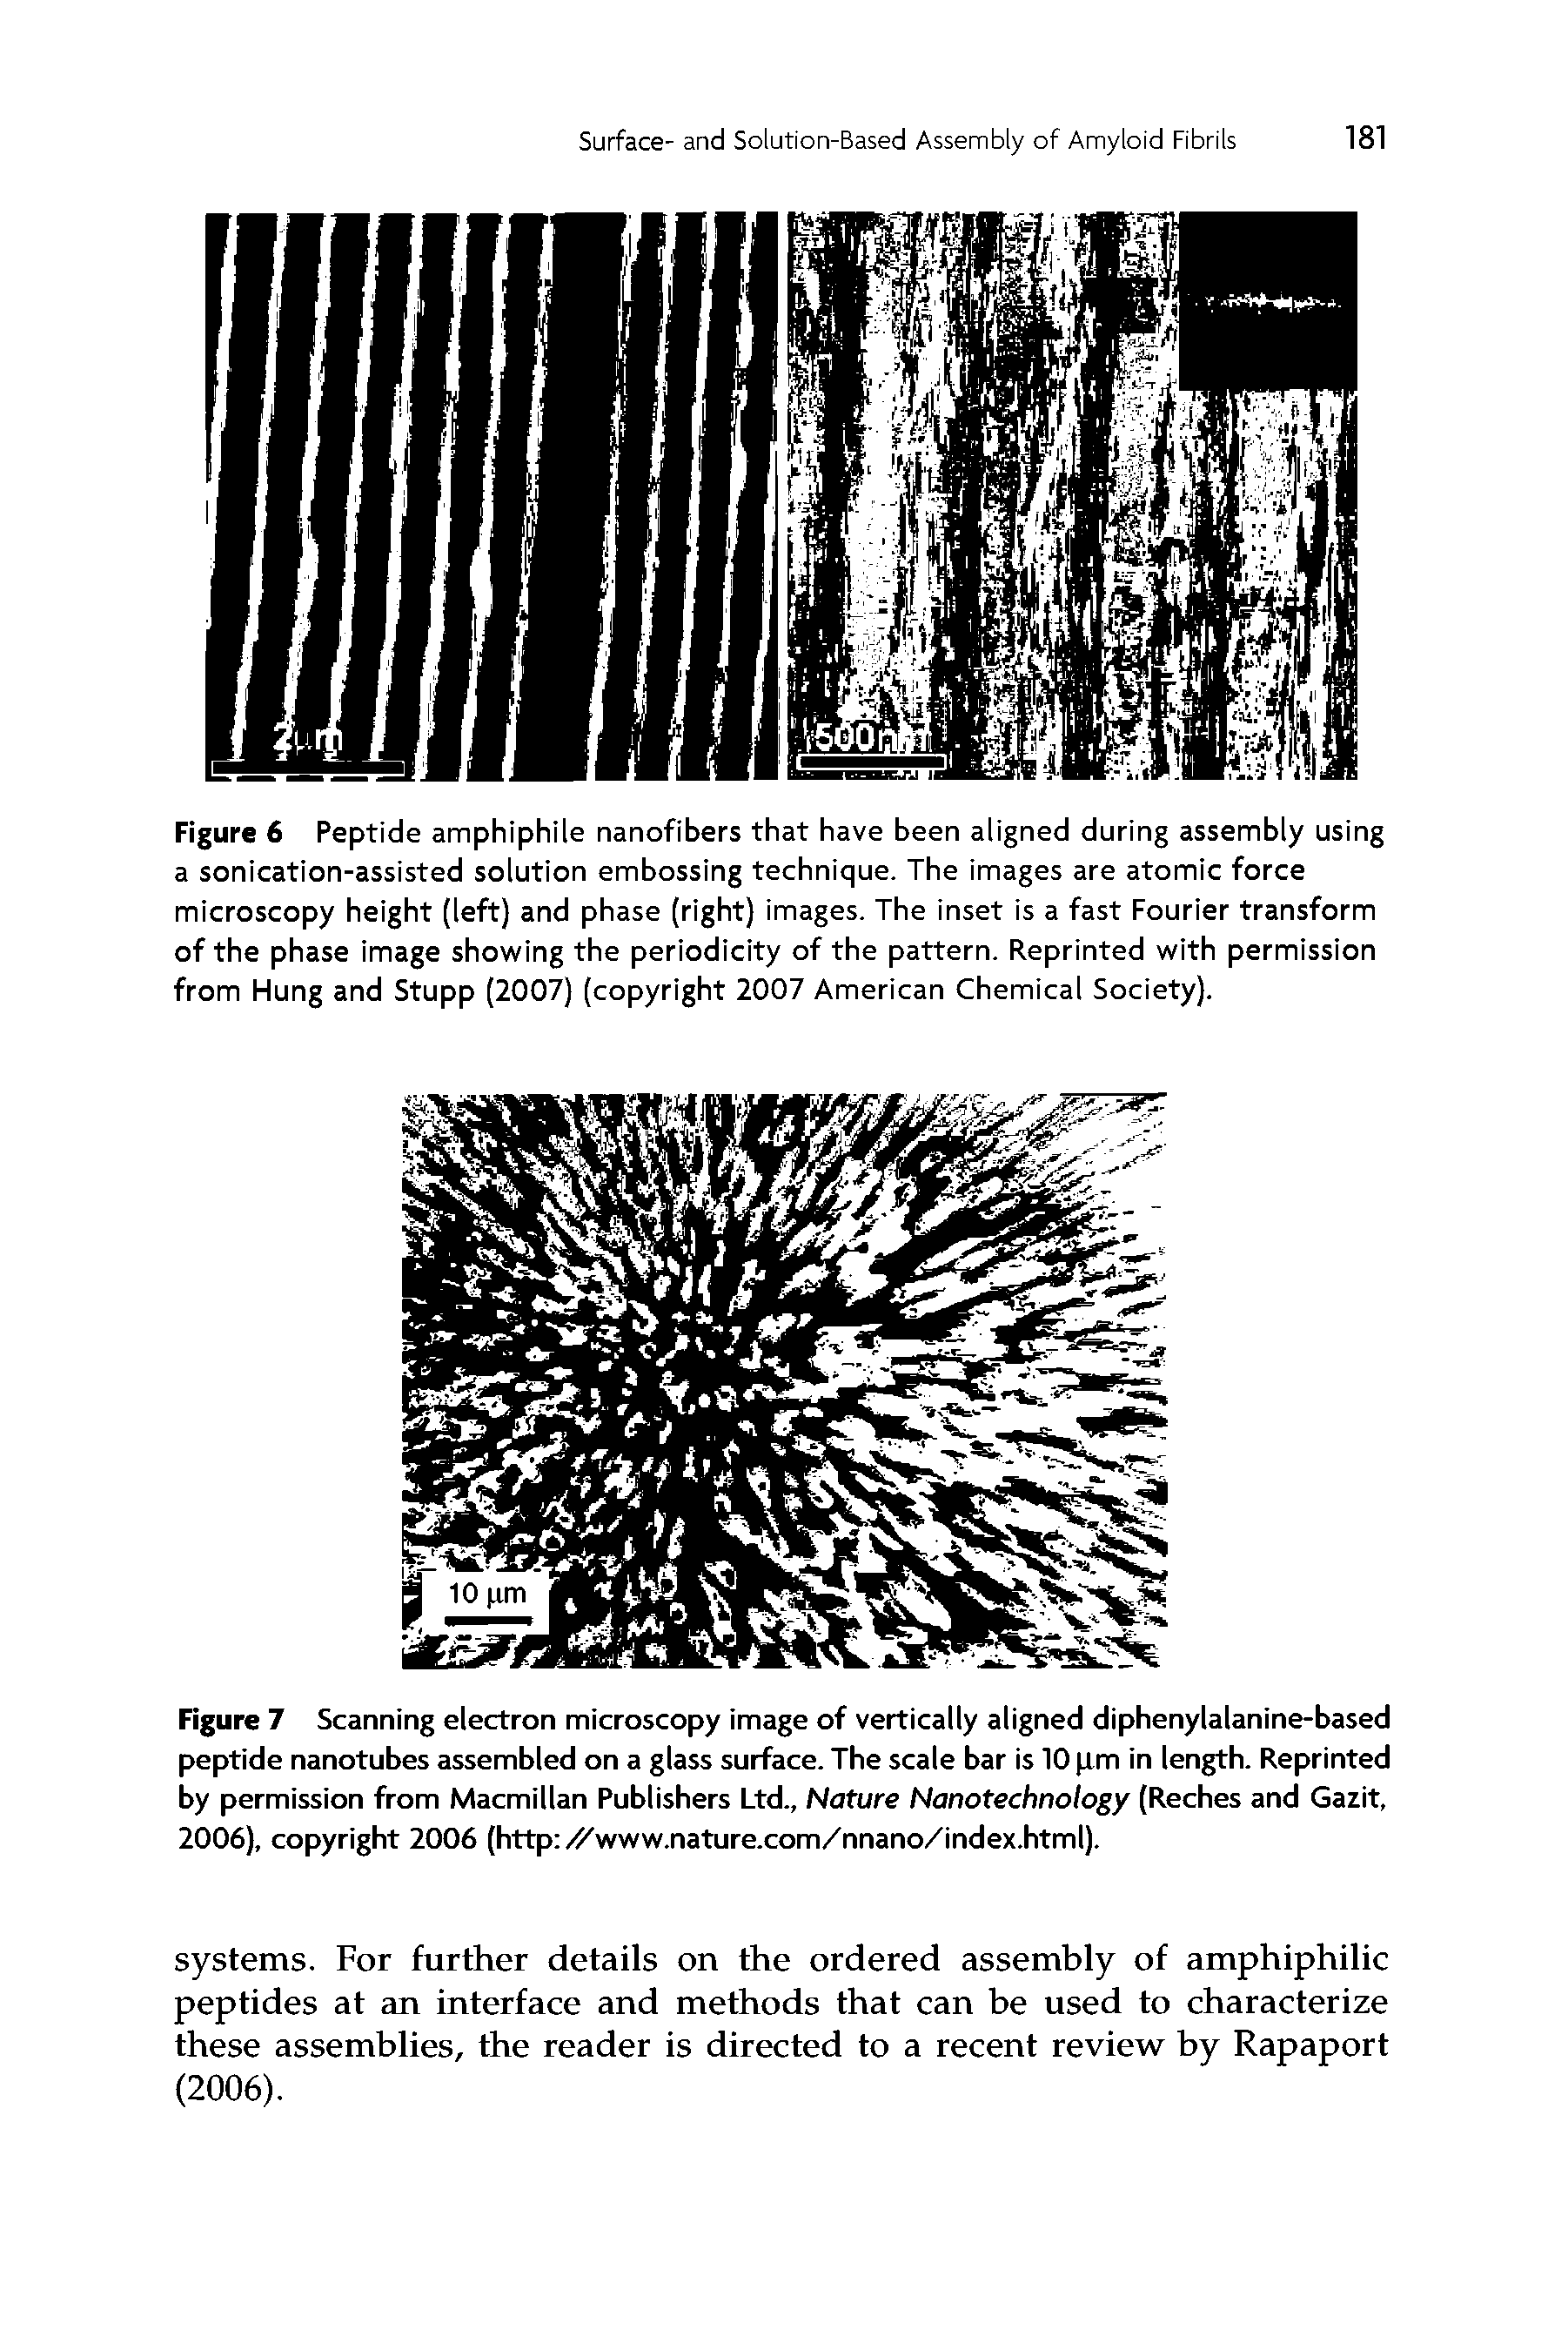 Figure 7 Scanning electron microscopy image of vertically aligned diphenylalanine-based peptide nanotubes assembled on a glass surface. The scale bar is 10 lm in length. Reprinted by permission from Macmillan Publishers Ltd., Nature Nanotechnology (Reches and Gazit, 2006), copyright 2006 (http //www.nature.com/nnano/index.html).